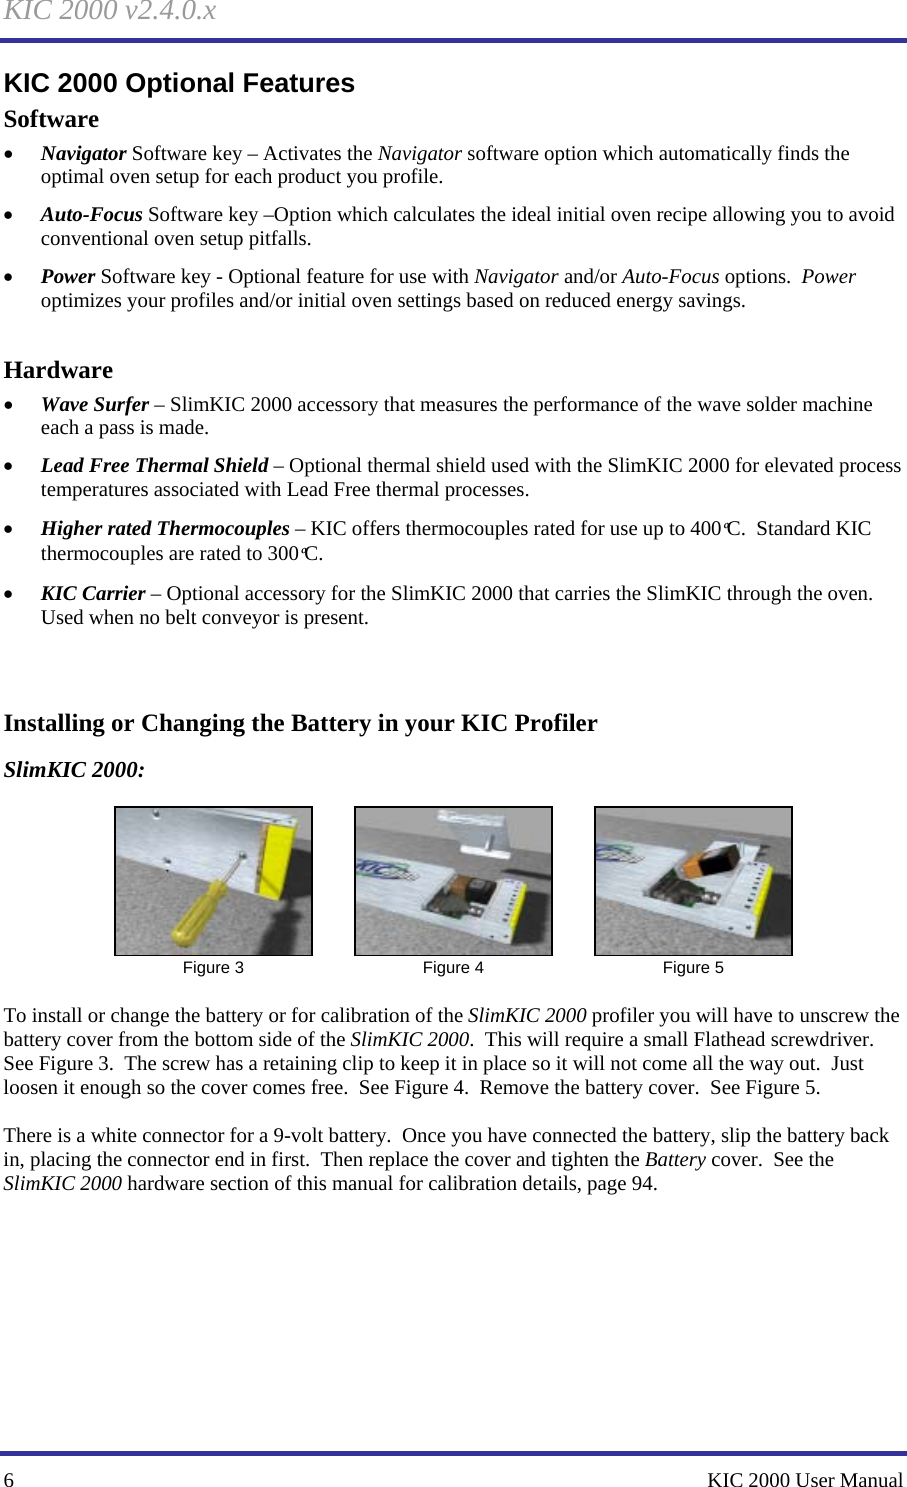 KIC 2000 v2.4.0.x 6    KIC 2000 User Manual KIC 2000 Optional Features Software • Navigator Software key – Activates the Navigator software option which automatically finds the optimal oven setup for each product you profile. • Auto-Focus Software key –Option which calculates the ideal initial oven recipe allowing you to avoid conventional oven setup pitfalls. • Power Software key - Optional feature for use with Navigator and/or Auto-Focus options.  Power optimizes your profiles and/or initial oven settings based on reduced energy savings.    Hardware • Wave Surfer – SlimKIC 2000 accessory that measures the performance of the wave solder machine each a pass is made. • Lead Free Thermal Shield – Optional thermal shield used with the SlimKIC 2000 for elevated process temperatures associated with Lead Free thermal processes. • Higher rated Thermocouples – KIC offers thermocouples rated for use up to 400ºC.  Standard KIC thermocouples are rated to 300ºC. • KIC Carrier – Optional accessory for the SlimKIC 2000 that carries the SlimKIC through the oven.  Used when no belt conveyor is present.    Installing or Changing the Battery in your KIC Profiler SlimKIC 2000:   Figure 3   Figure 4   Figure 5  To install or change the battery or for calibration of the SlimKIC 2000 profiler you will have to unscrew the battery cover from the bottom side of the SlimKIC 2000.  This will require a small Flathead screwdriver.  See Figure 3.  The screw has a retaining clip to keep it in place so it will not come all the way out.  Just loosen it enough so the cover comes free.  See Figure 4.  Remove the battery cover.  See Figure 5.    There is a white connector for a 9-volt battery.  Once you have connected the battery, slip the battery back in, placing the connector end in first.  Then replace the cover and tighten the Battery cover.  See the SlimKIC 2000 hardware section of this manual for calibration details, page 94.     